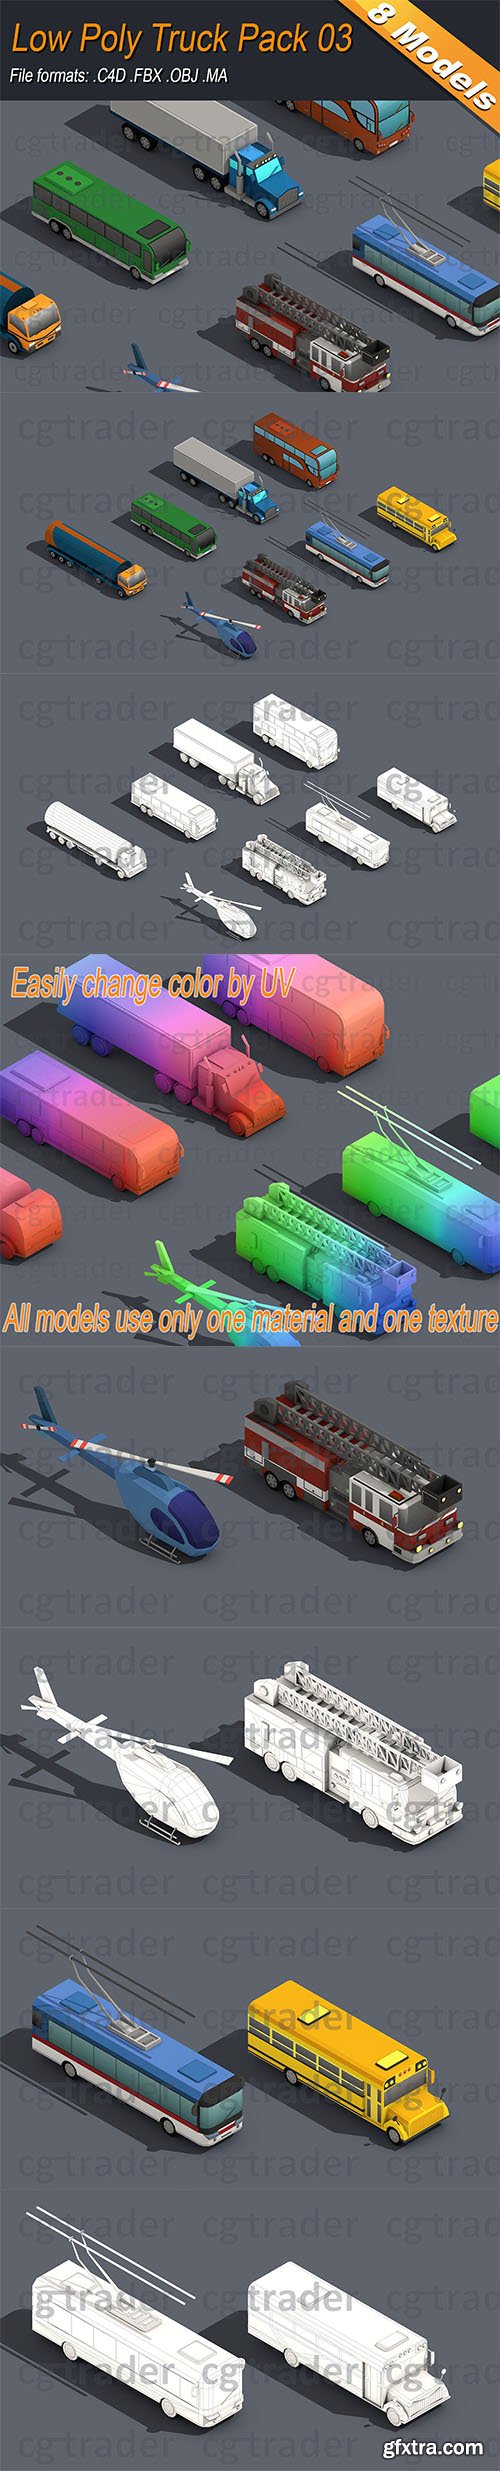 Cgtrader - Low Poly Truck Pack 03 Isometric Low-poly 3D model